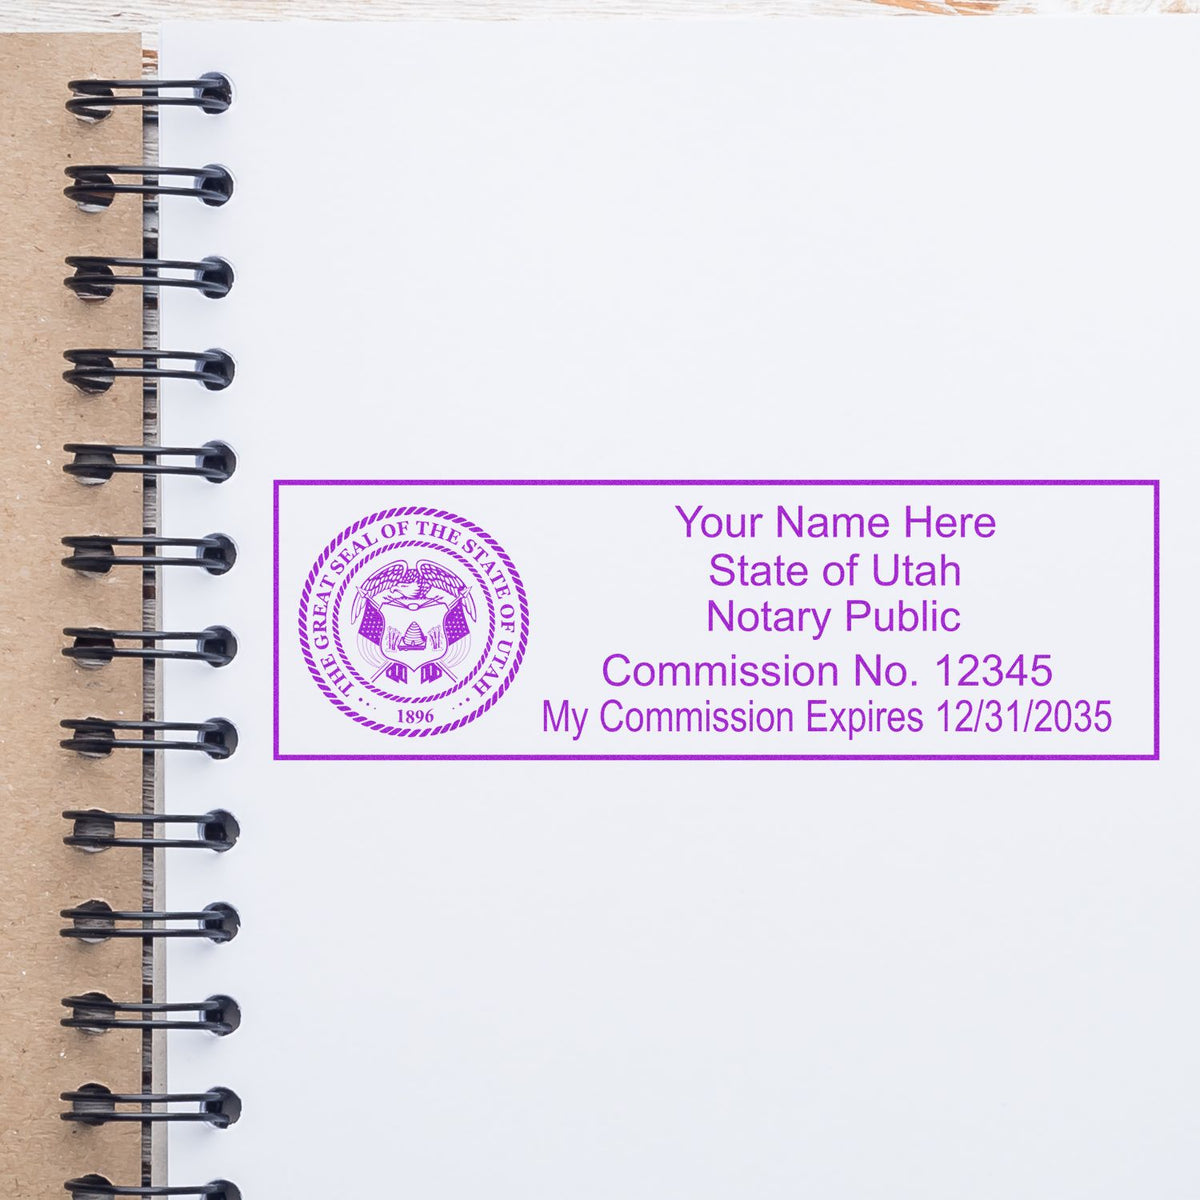 A lifestyle photo showing a stamped image of the Wooden Handle Utah State Seal Notary Public Stamp on a piece of paper